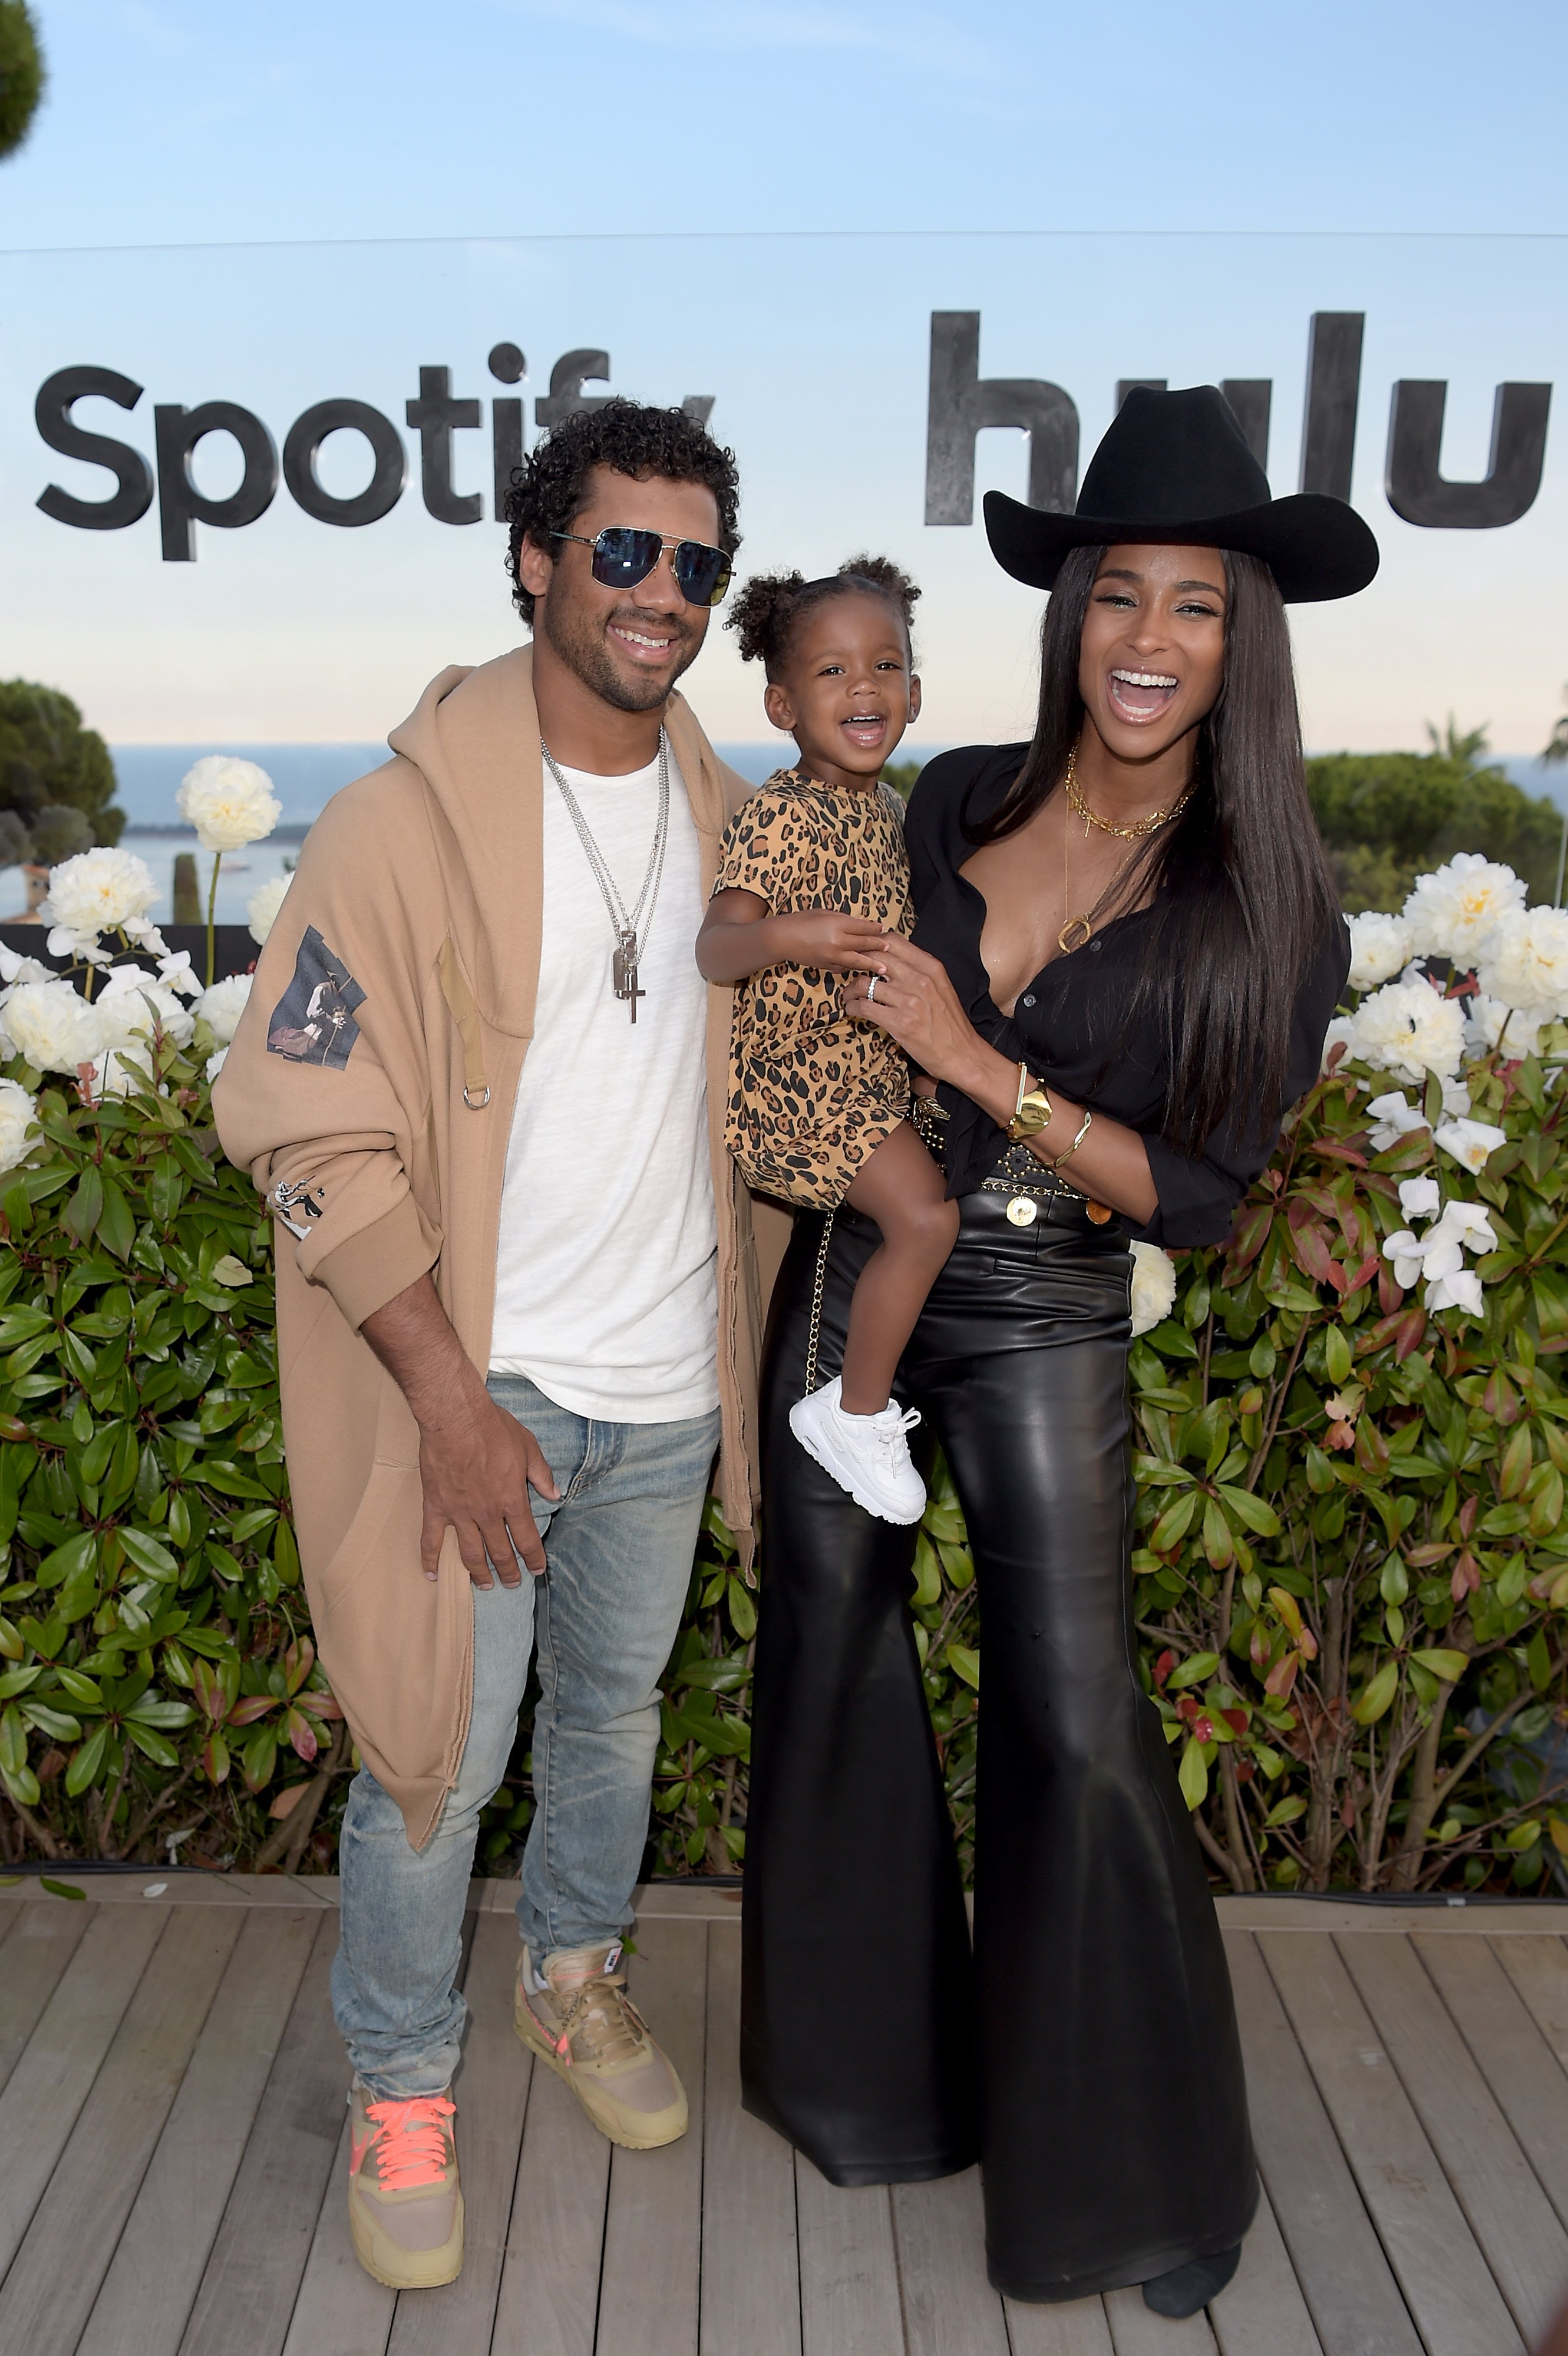 Russell Wilson, Sienna Princess, and Ciara at an intimate evening of music and culture hosted by Spotify and Hulu in July 2019 | Photo: Getty Images